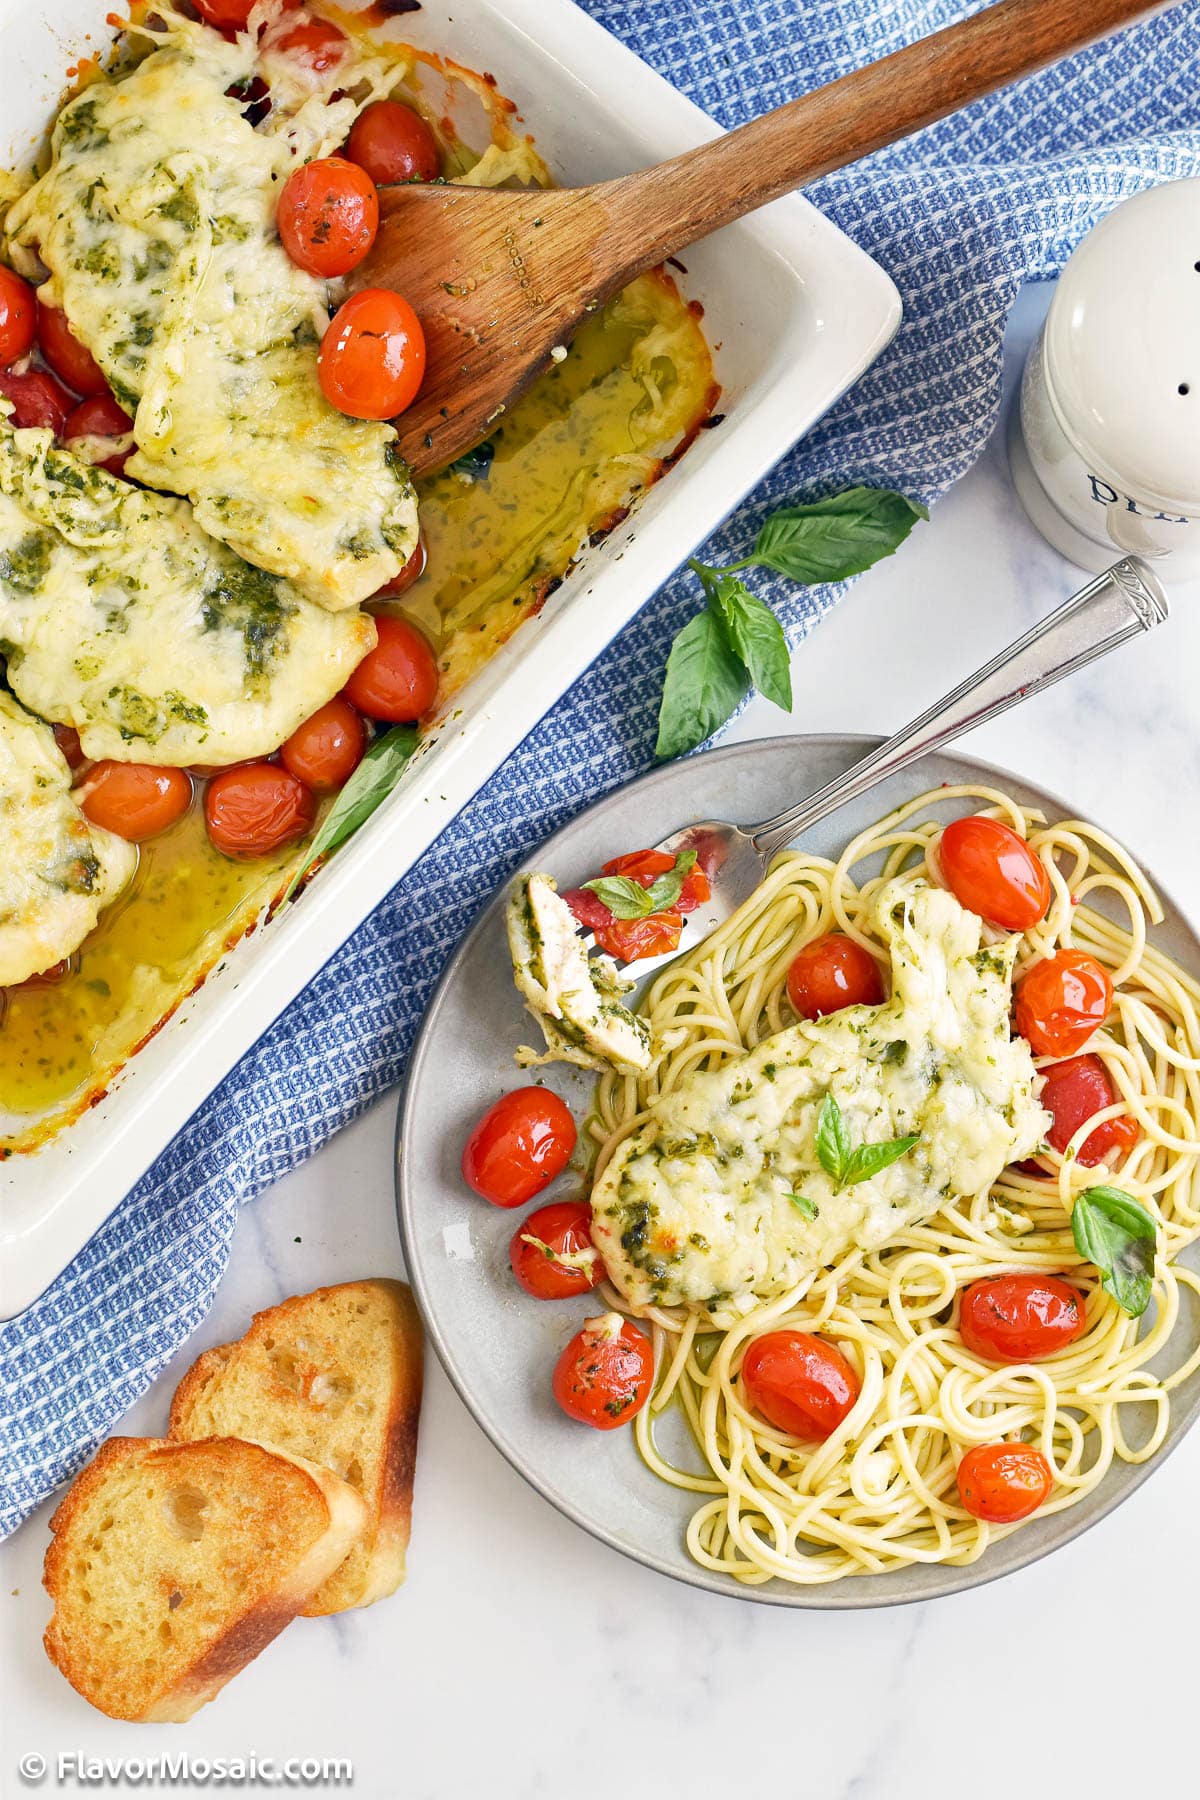 Overhead view of baking dish with cheese covered pesto chicken in the upper left corner, with a plate of a serving of pesto chicken with spaghetti and cherry tomatoes on a blue gray plate on a white background. 2 pieces of toast are on the bottom left.